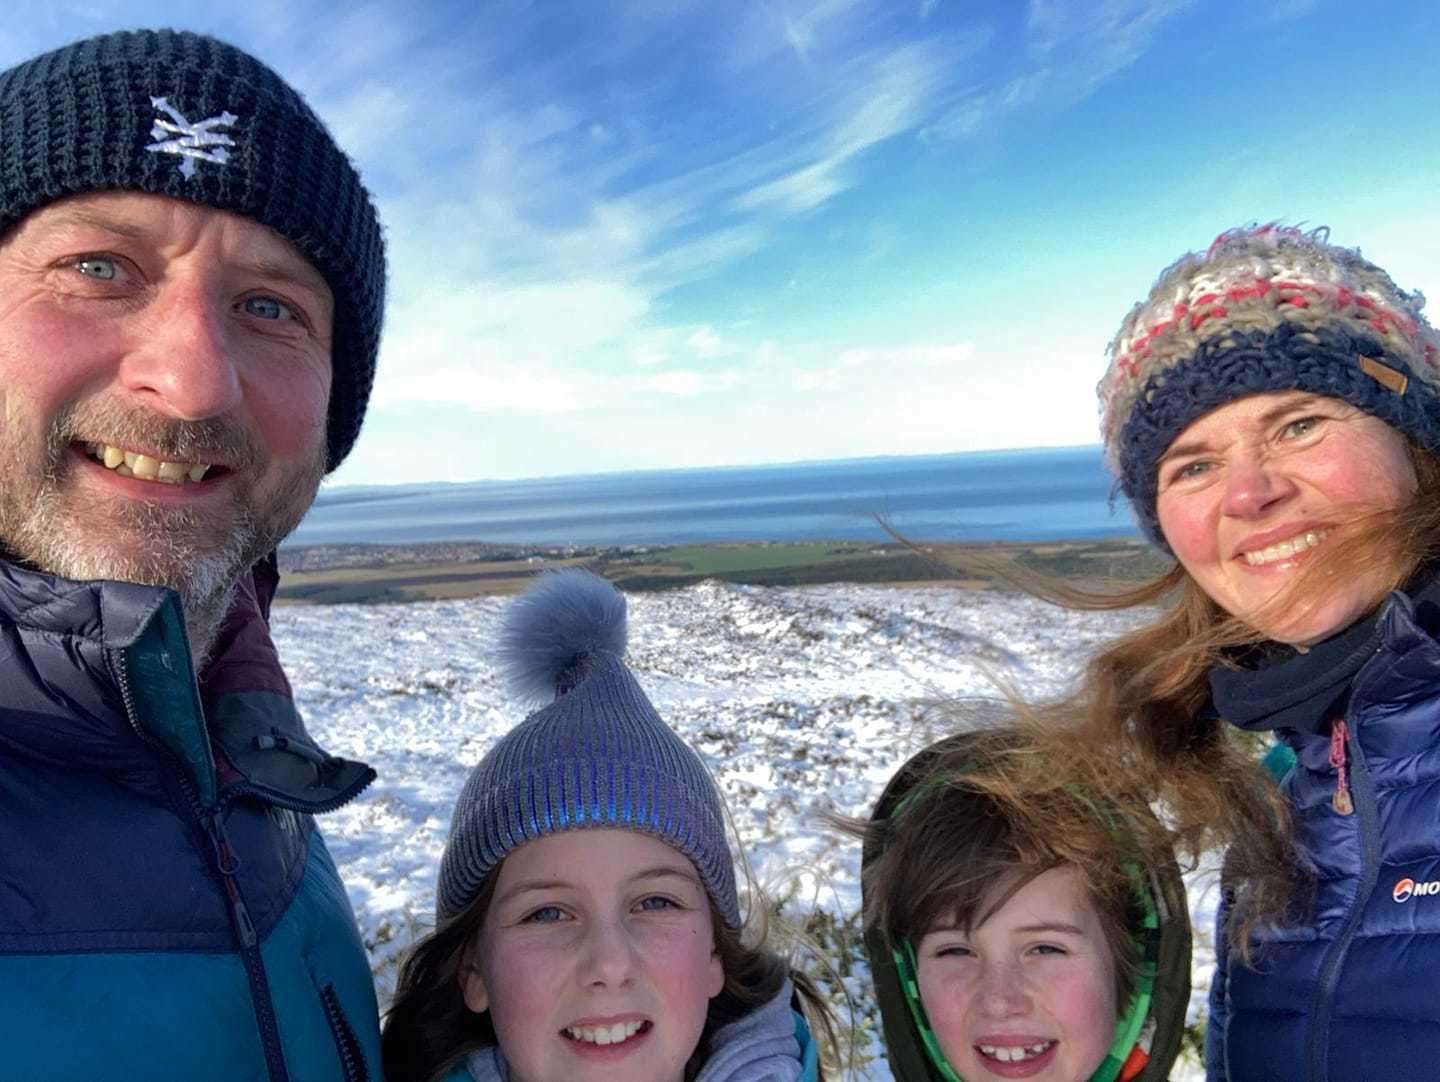 The Dunbar family, from Duffus, taking part in Outfit Moray's Winter Challenge.